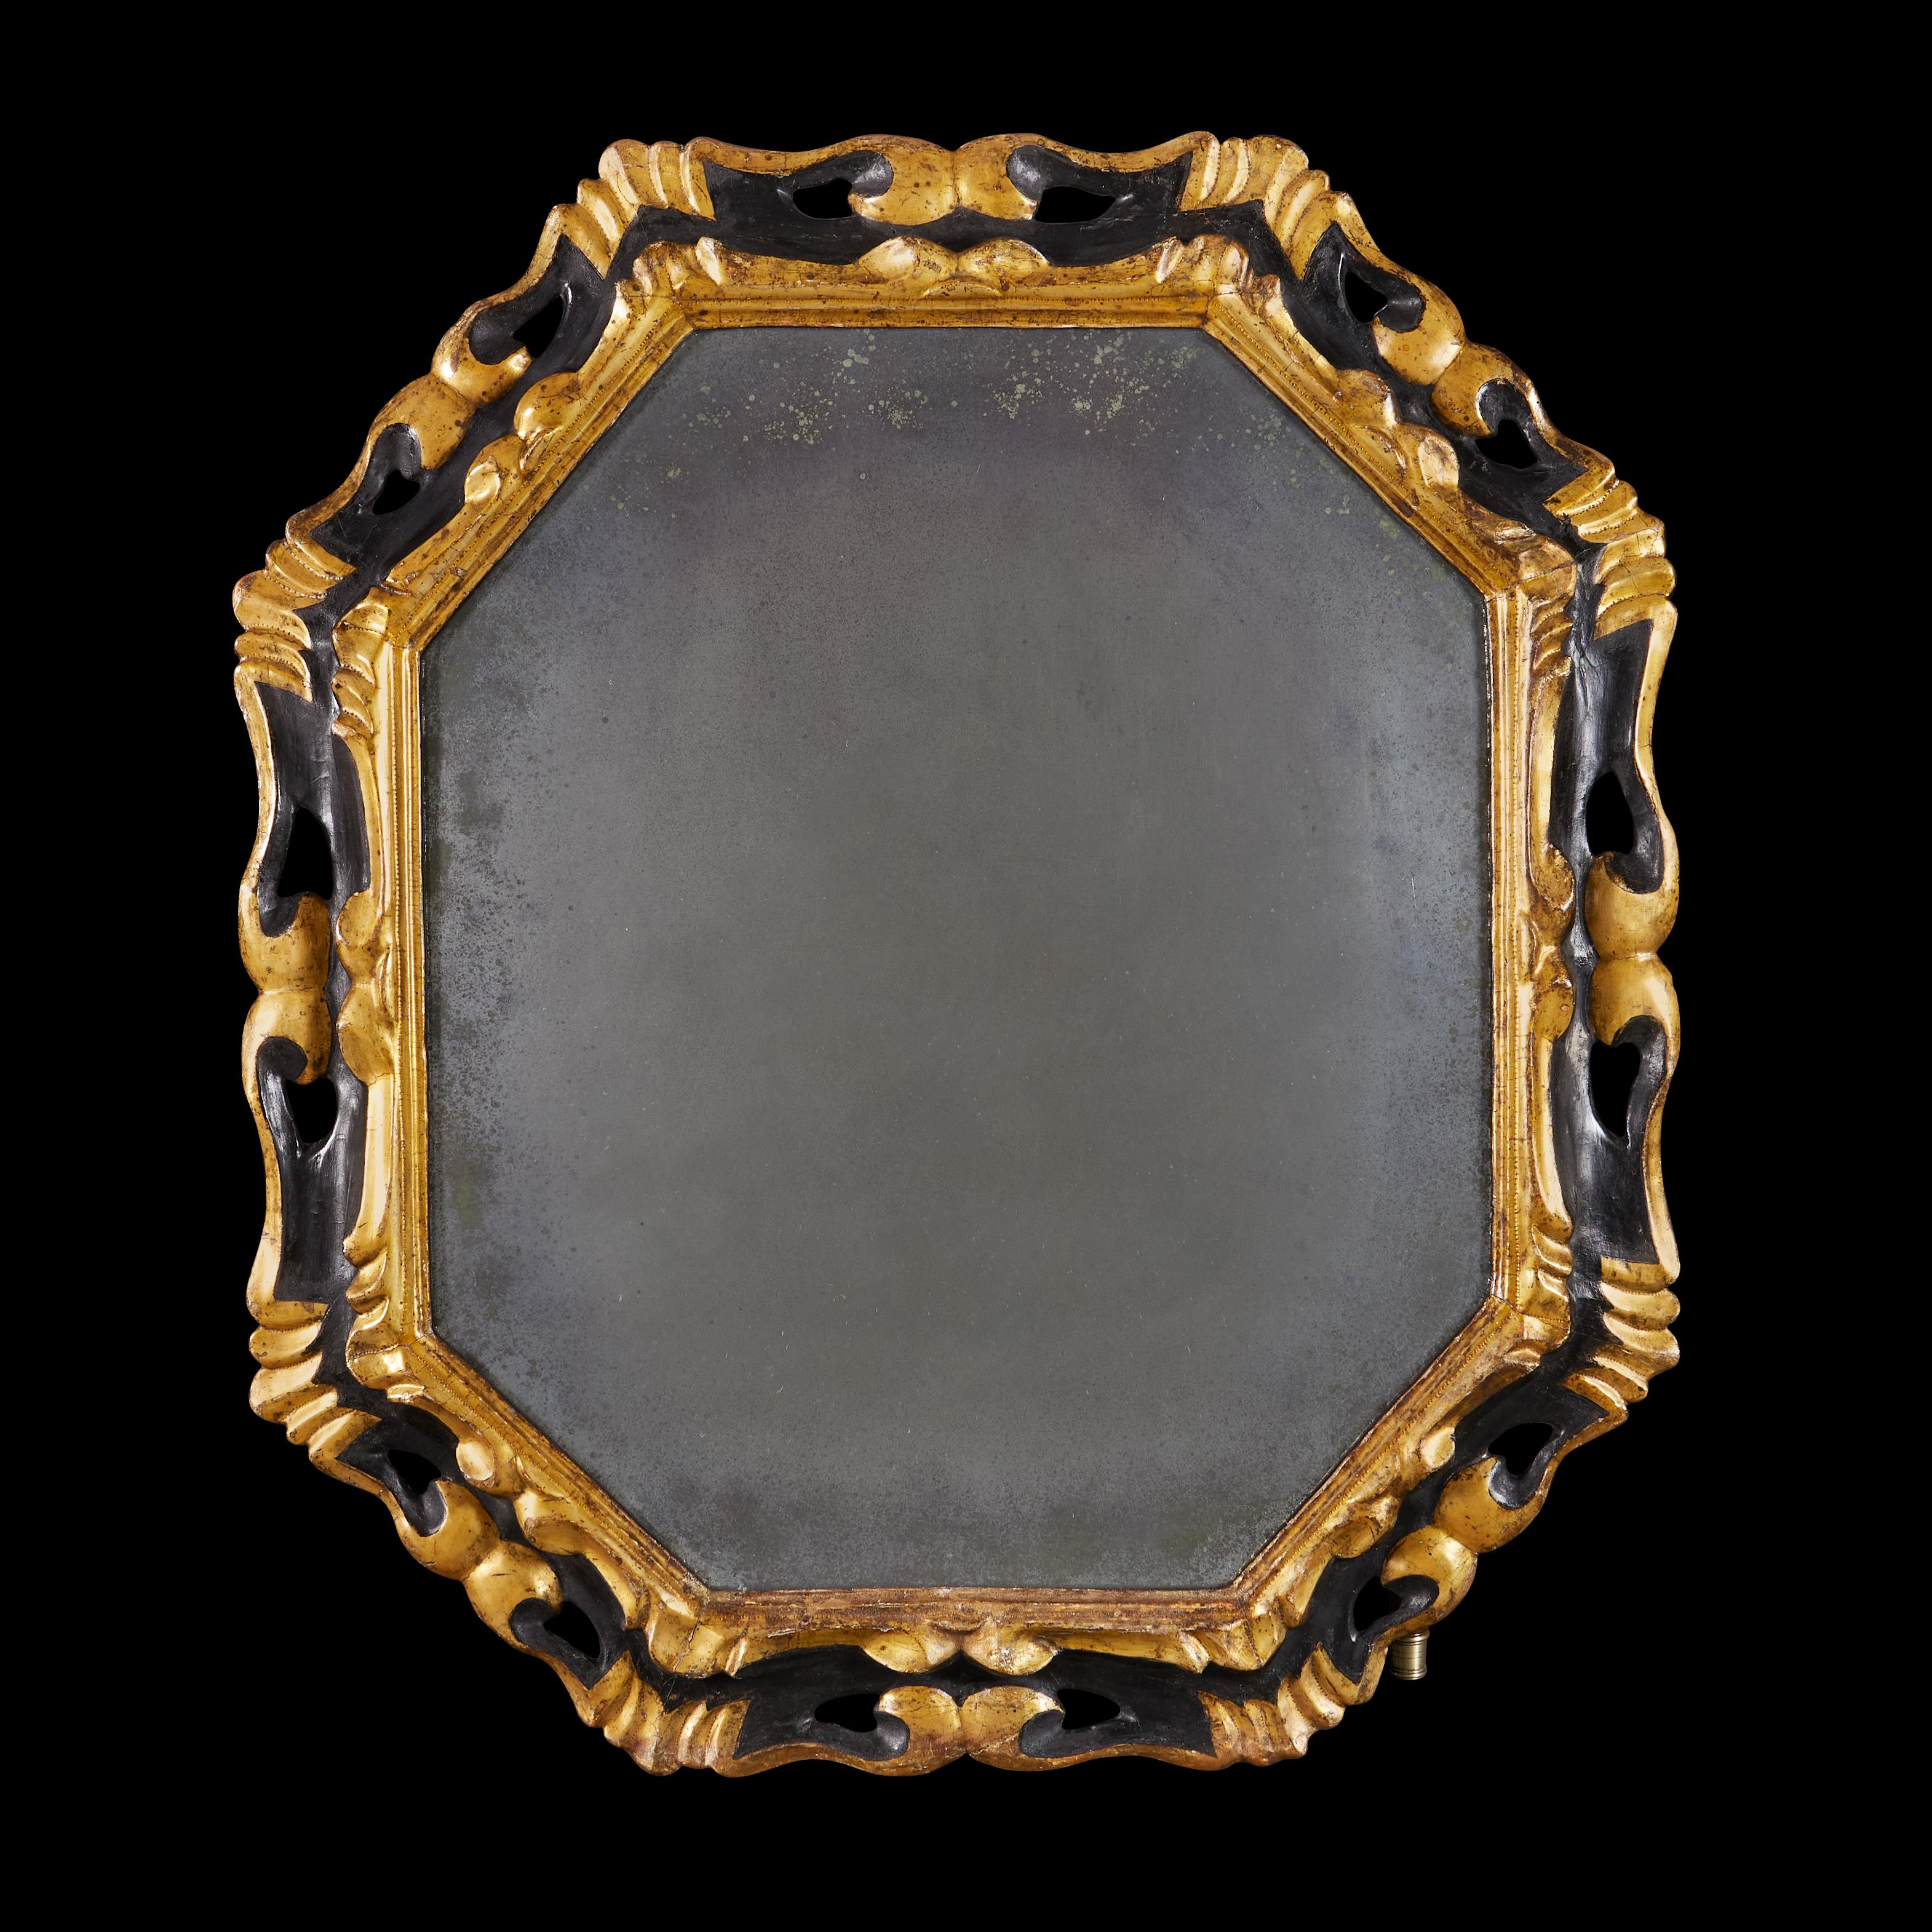 Italy, circa 1850

A striking mid nineteenth century octagonal mirror, with pierced rocaille border, the surface ebonised with gilded highlights, retaining the original mercury mirror plate.

Height  93.00cm
Width    80.00cm